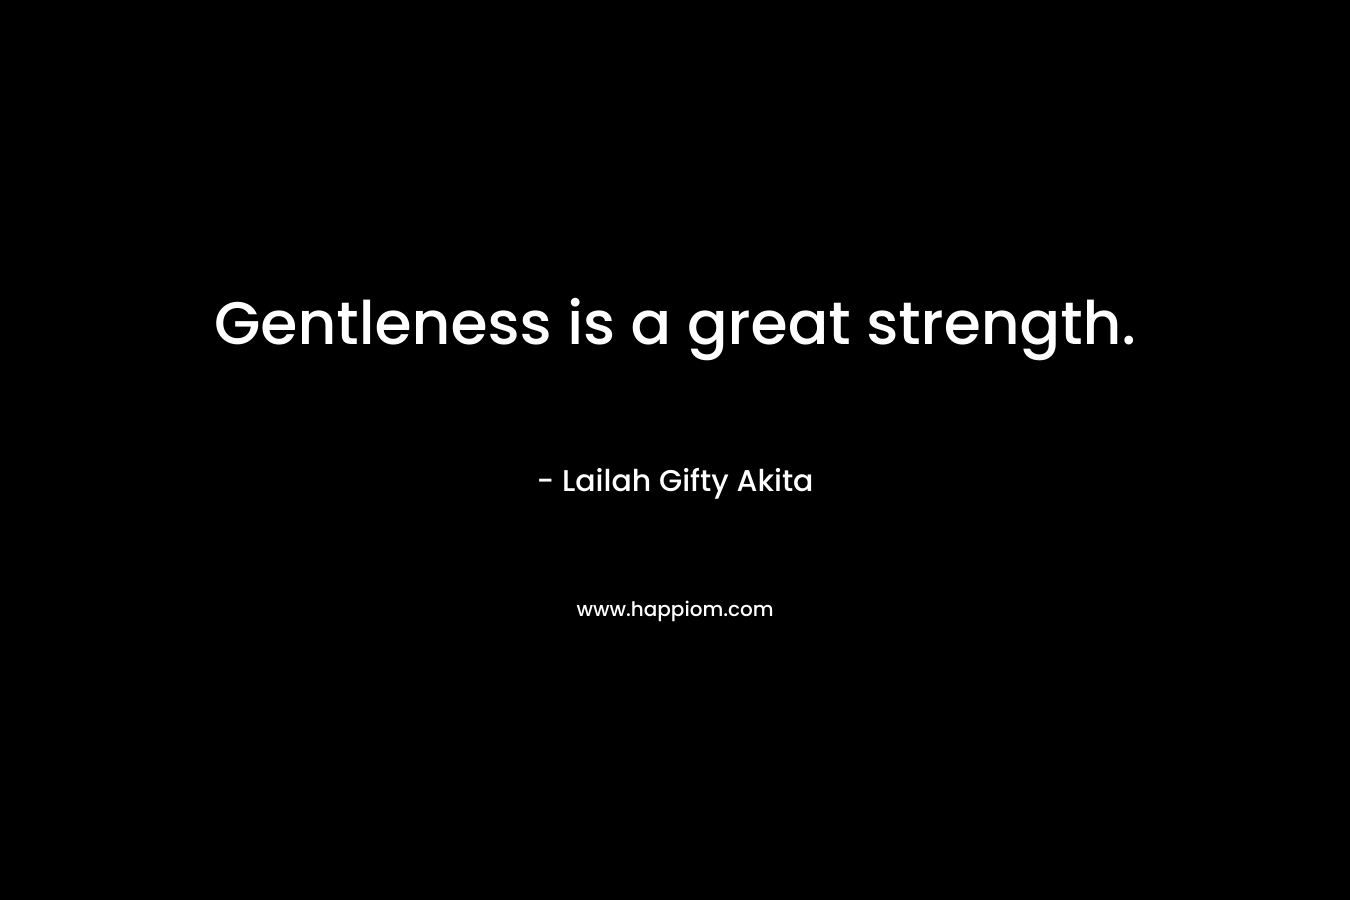 Gentleness is a great strength.